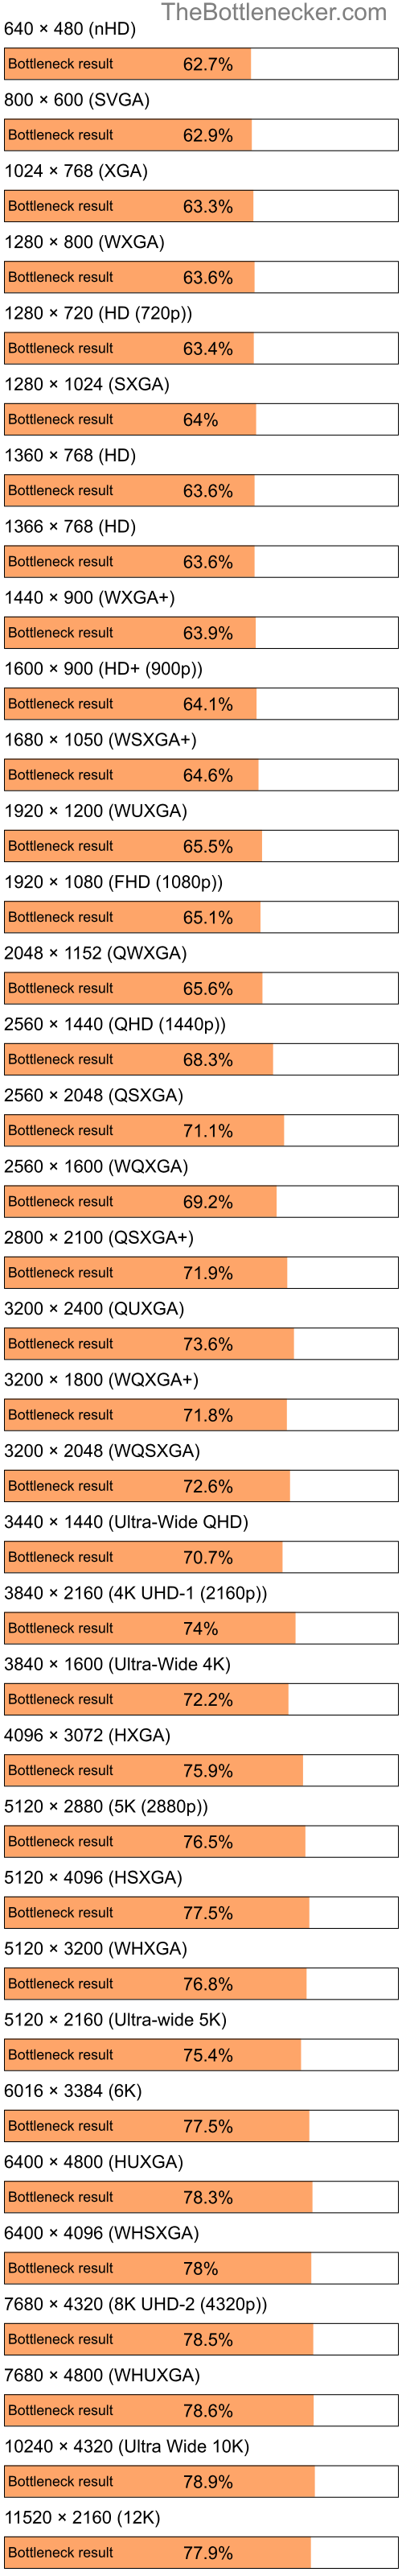 Bottleneck results by resolution for Intel Pentium 4 and NVIDIA Quadro FX 370M in General Tasks